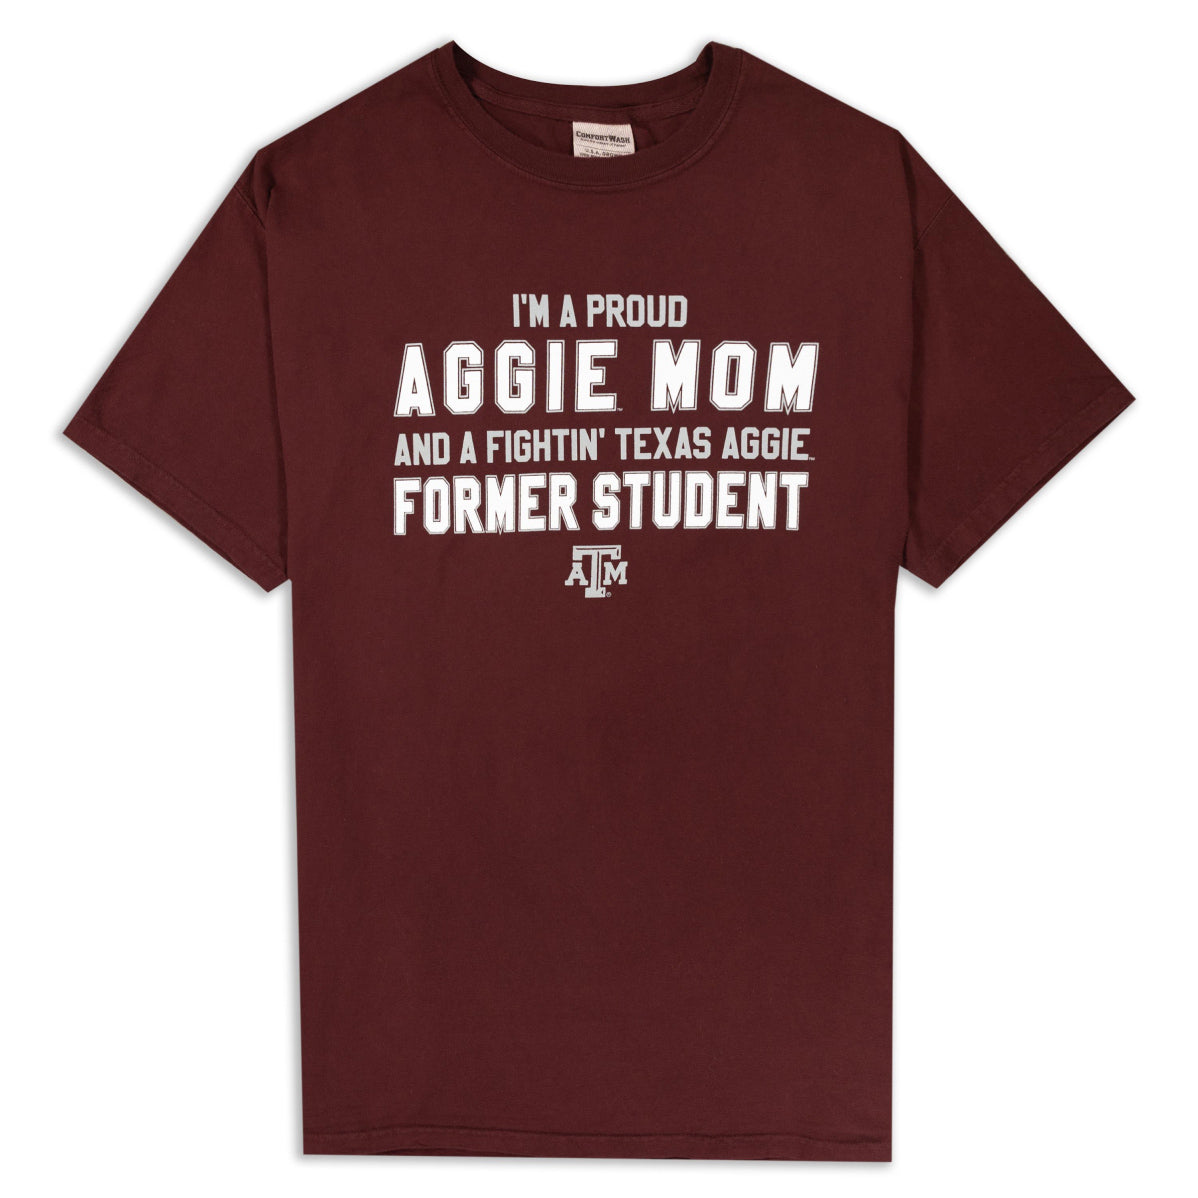 AGGIE MOM/FORMER STUDENT